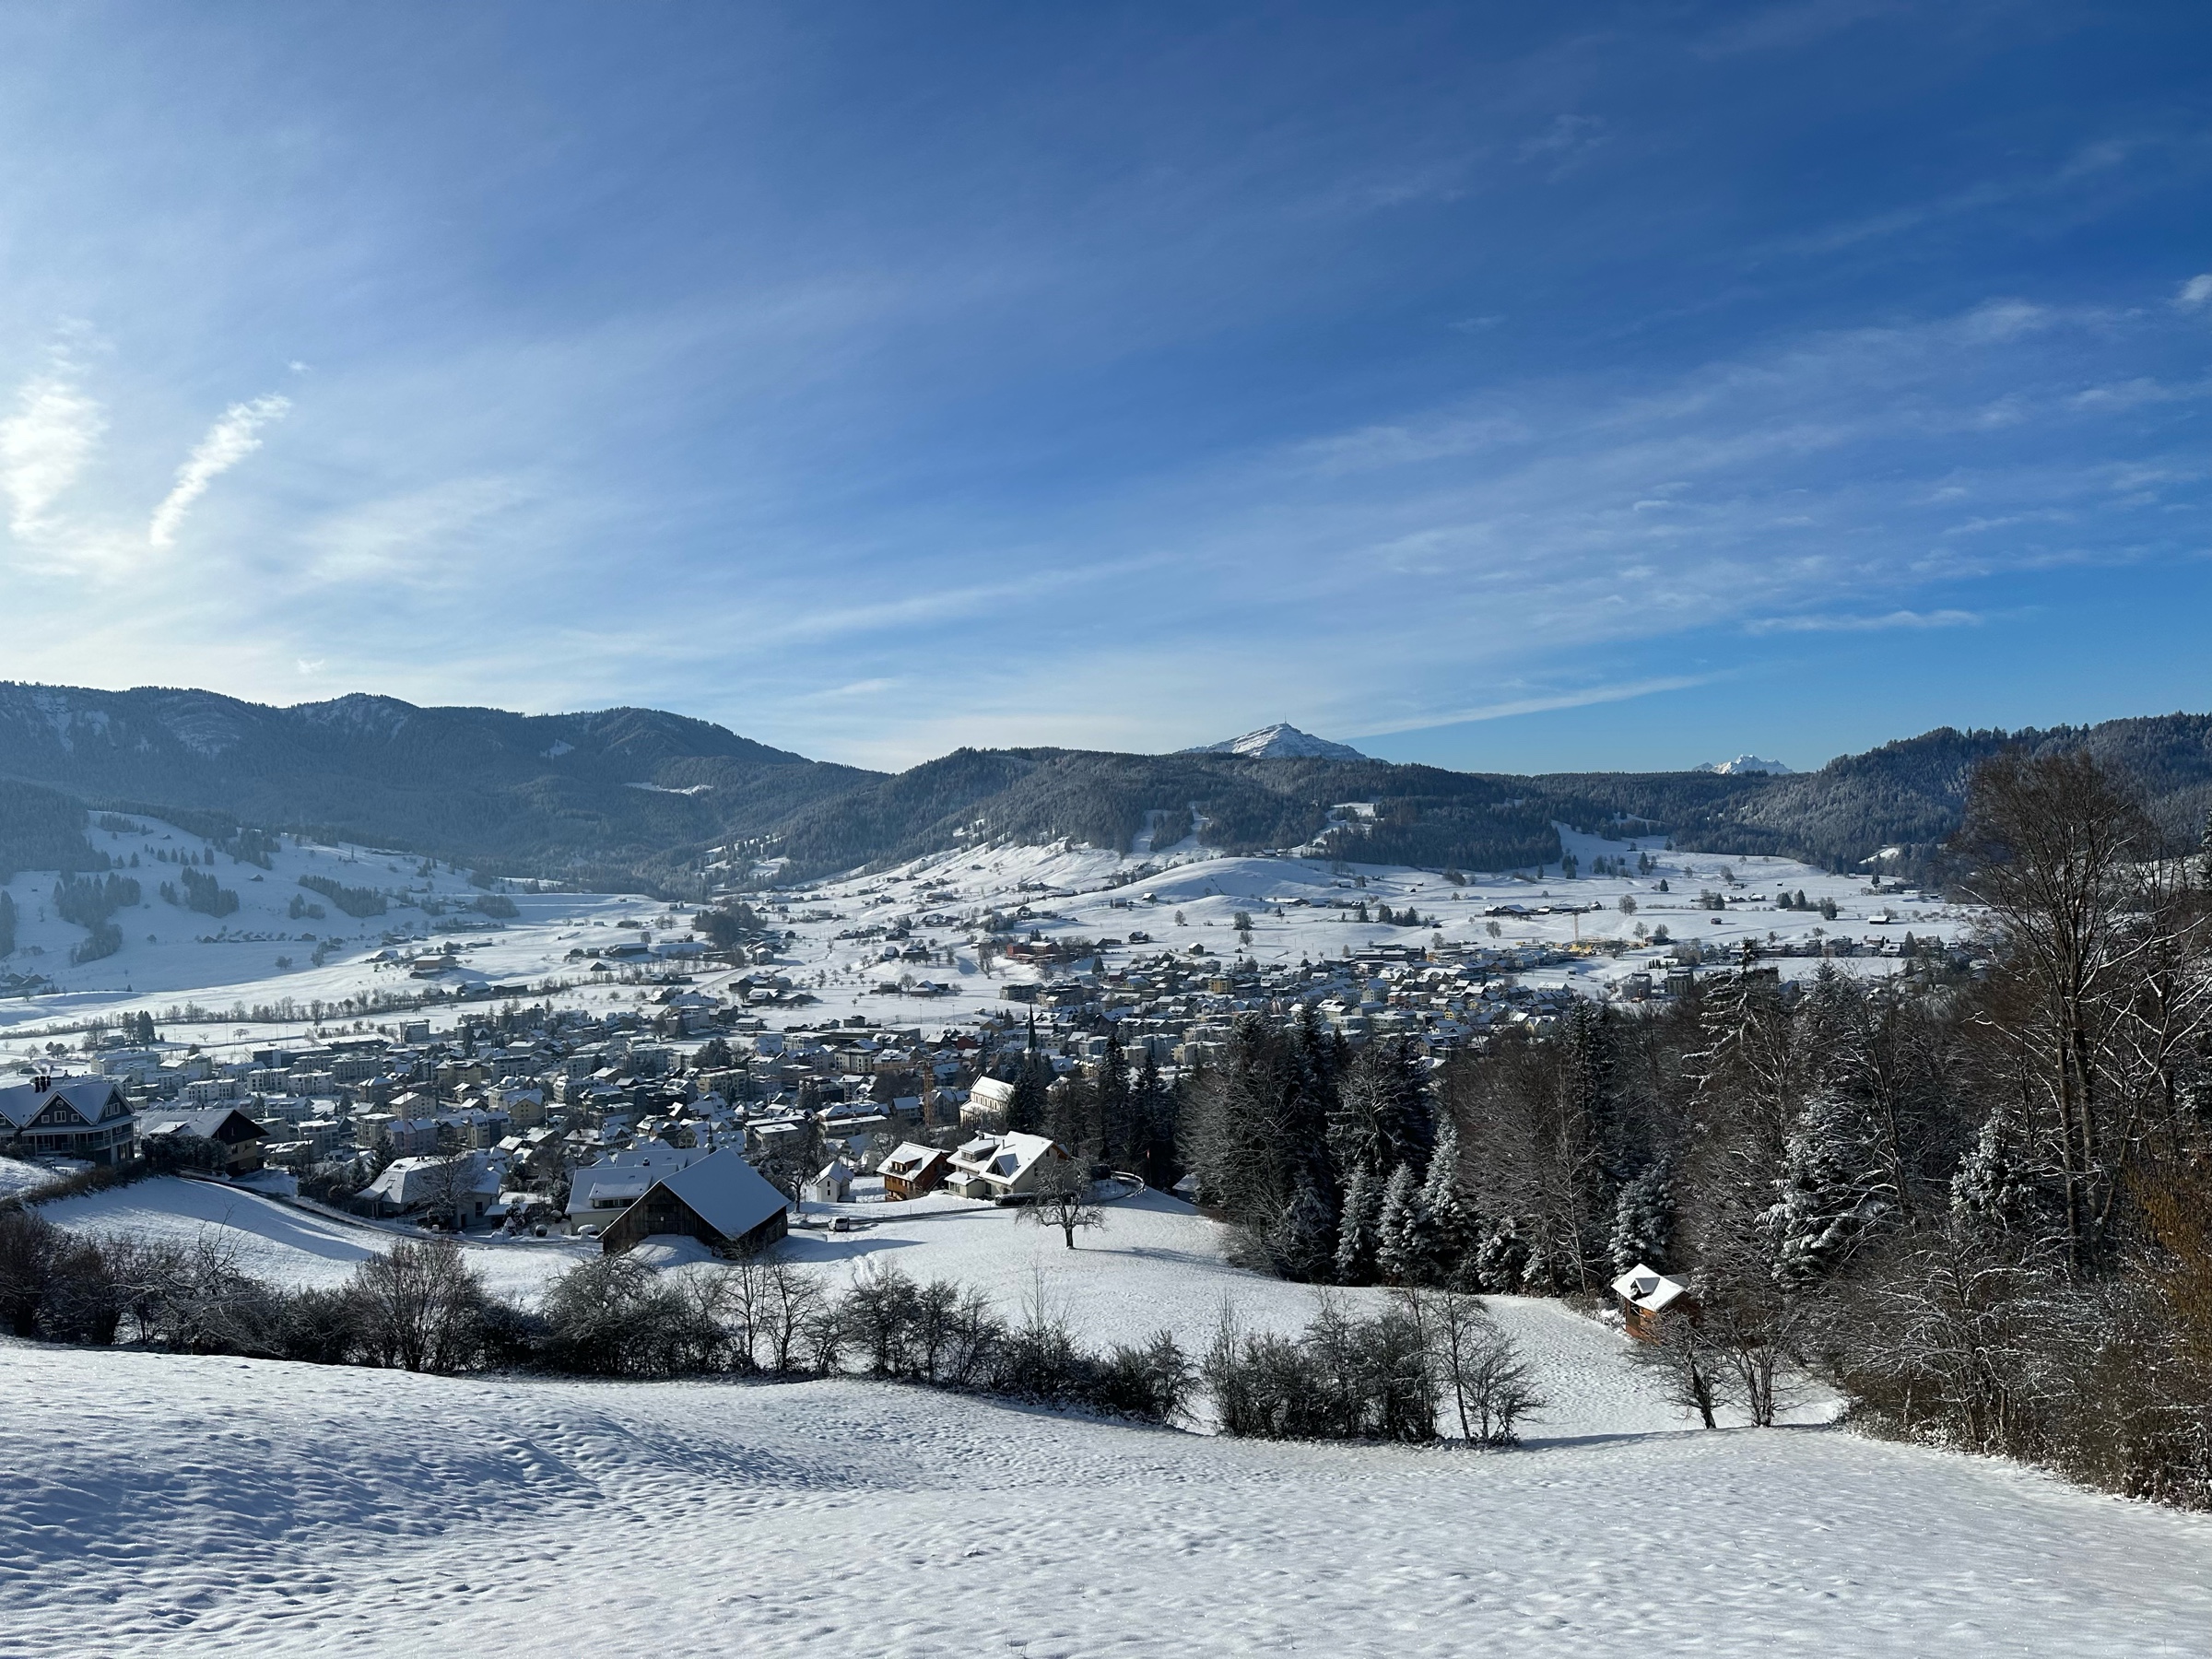 Landscape photo of a snow-covered valley with a town at the bottom.